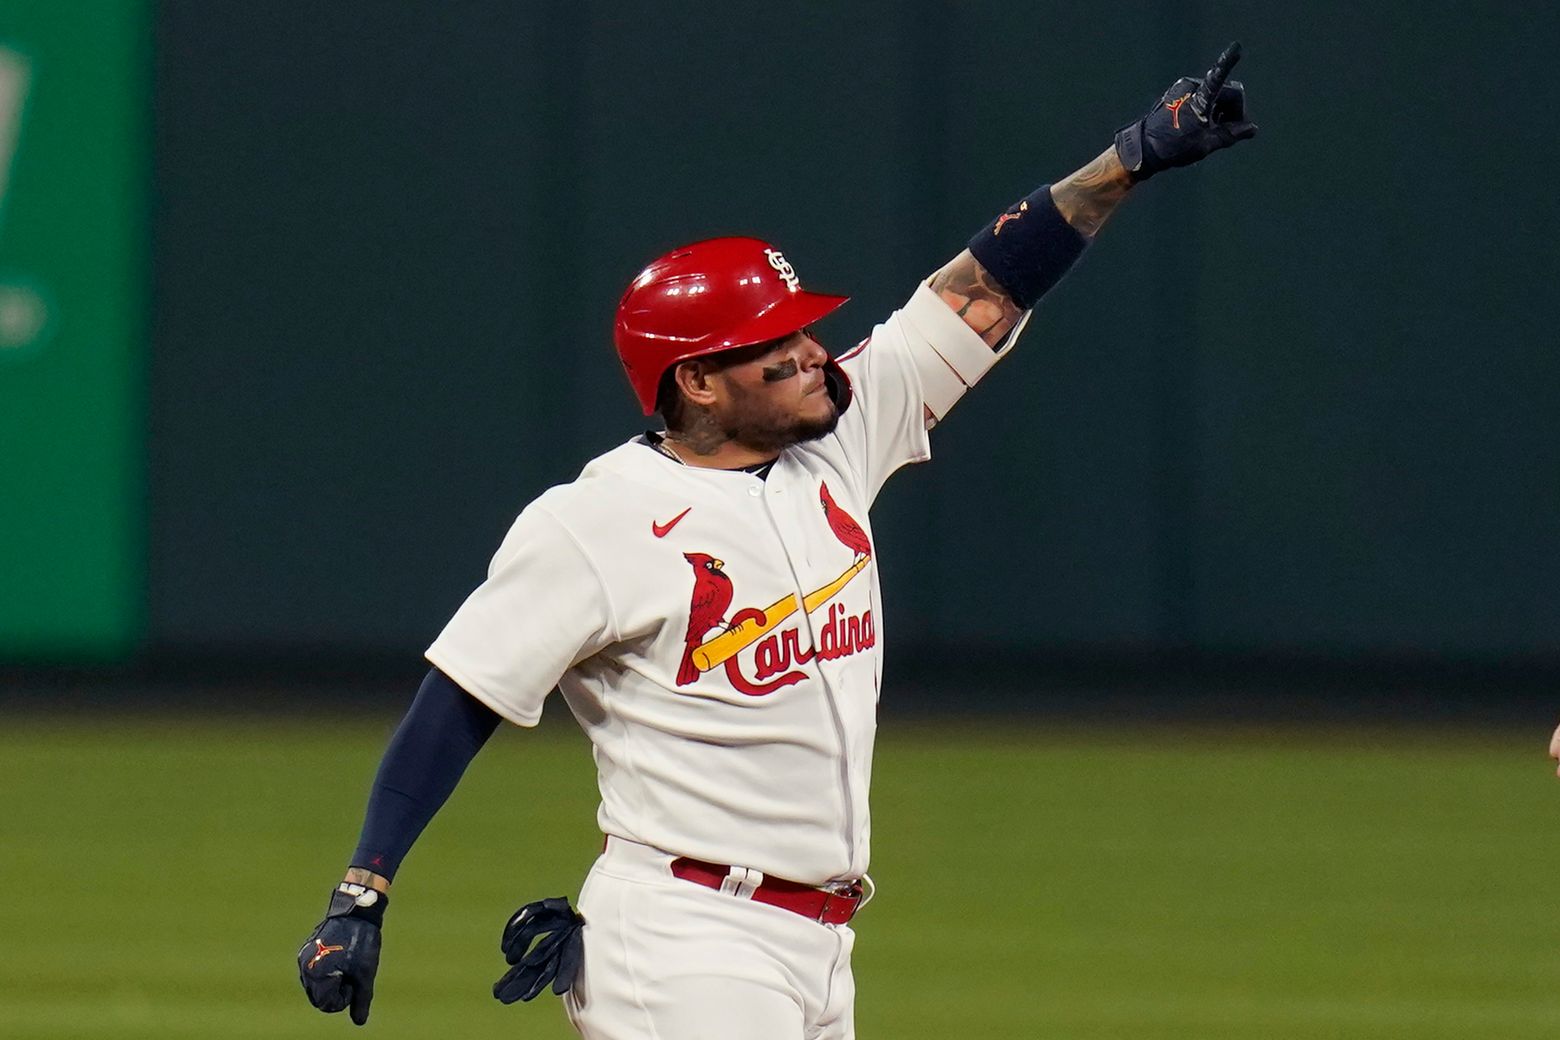 Cardinals: Why Andrew Knizner is getting playing time over Yadier